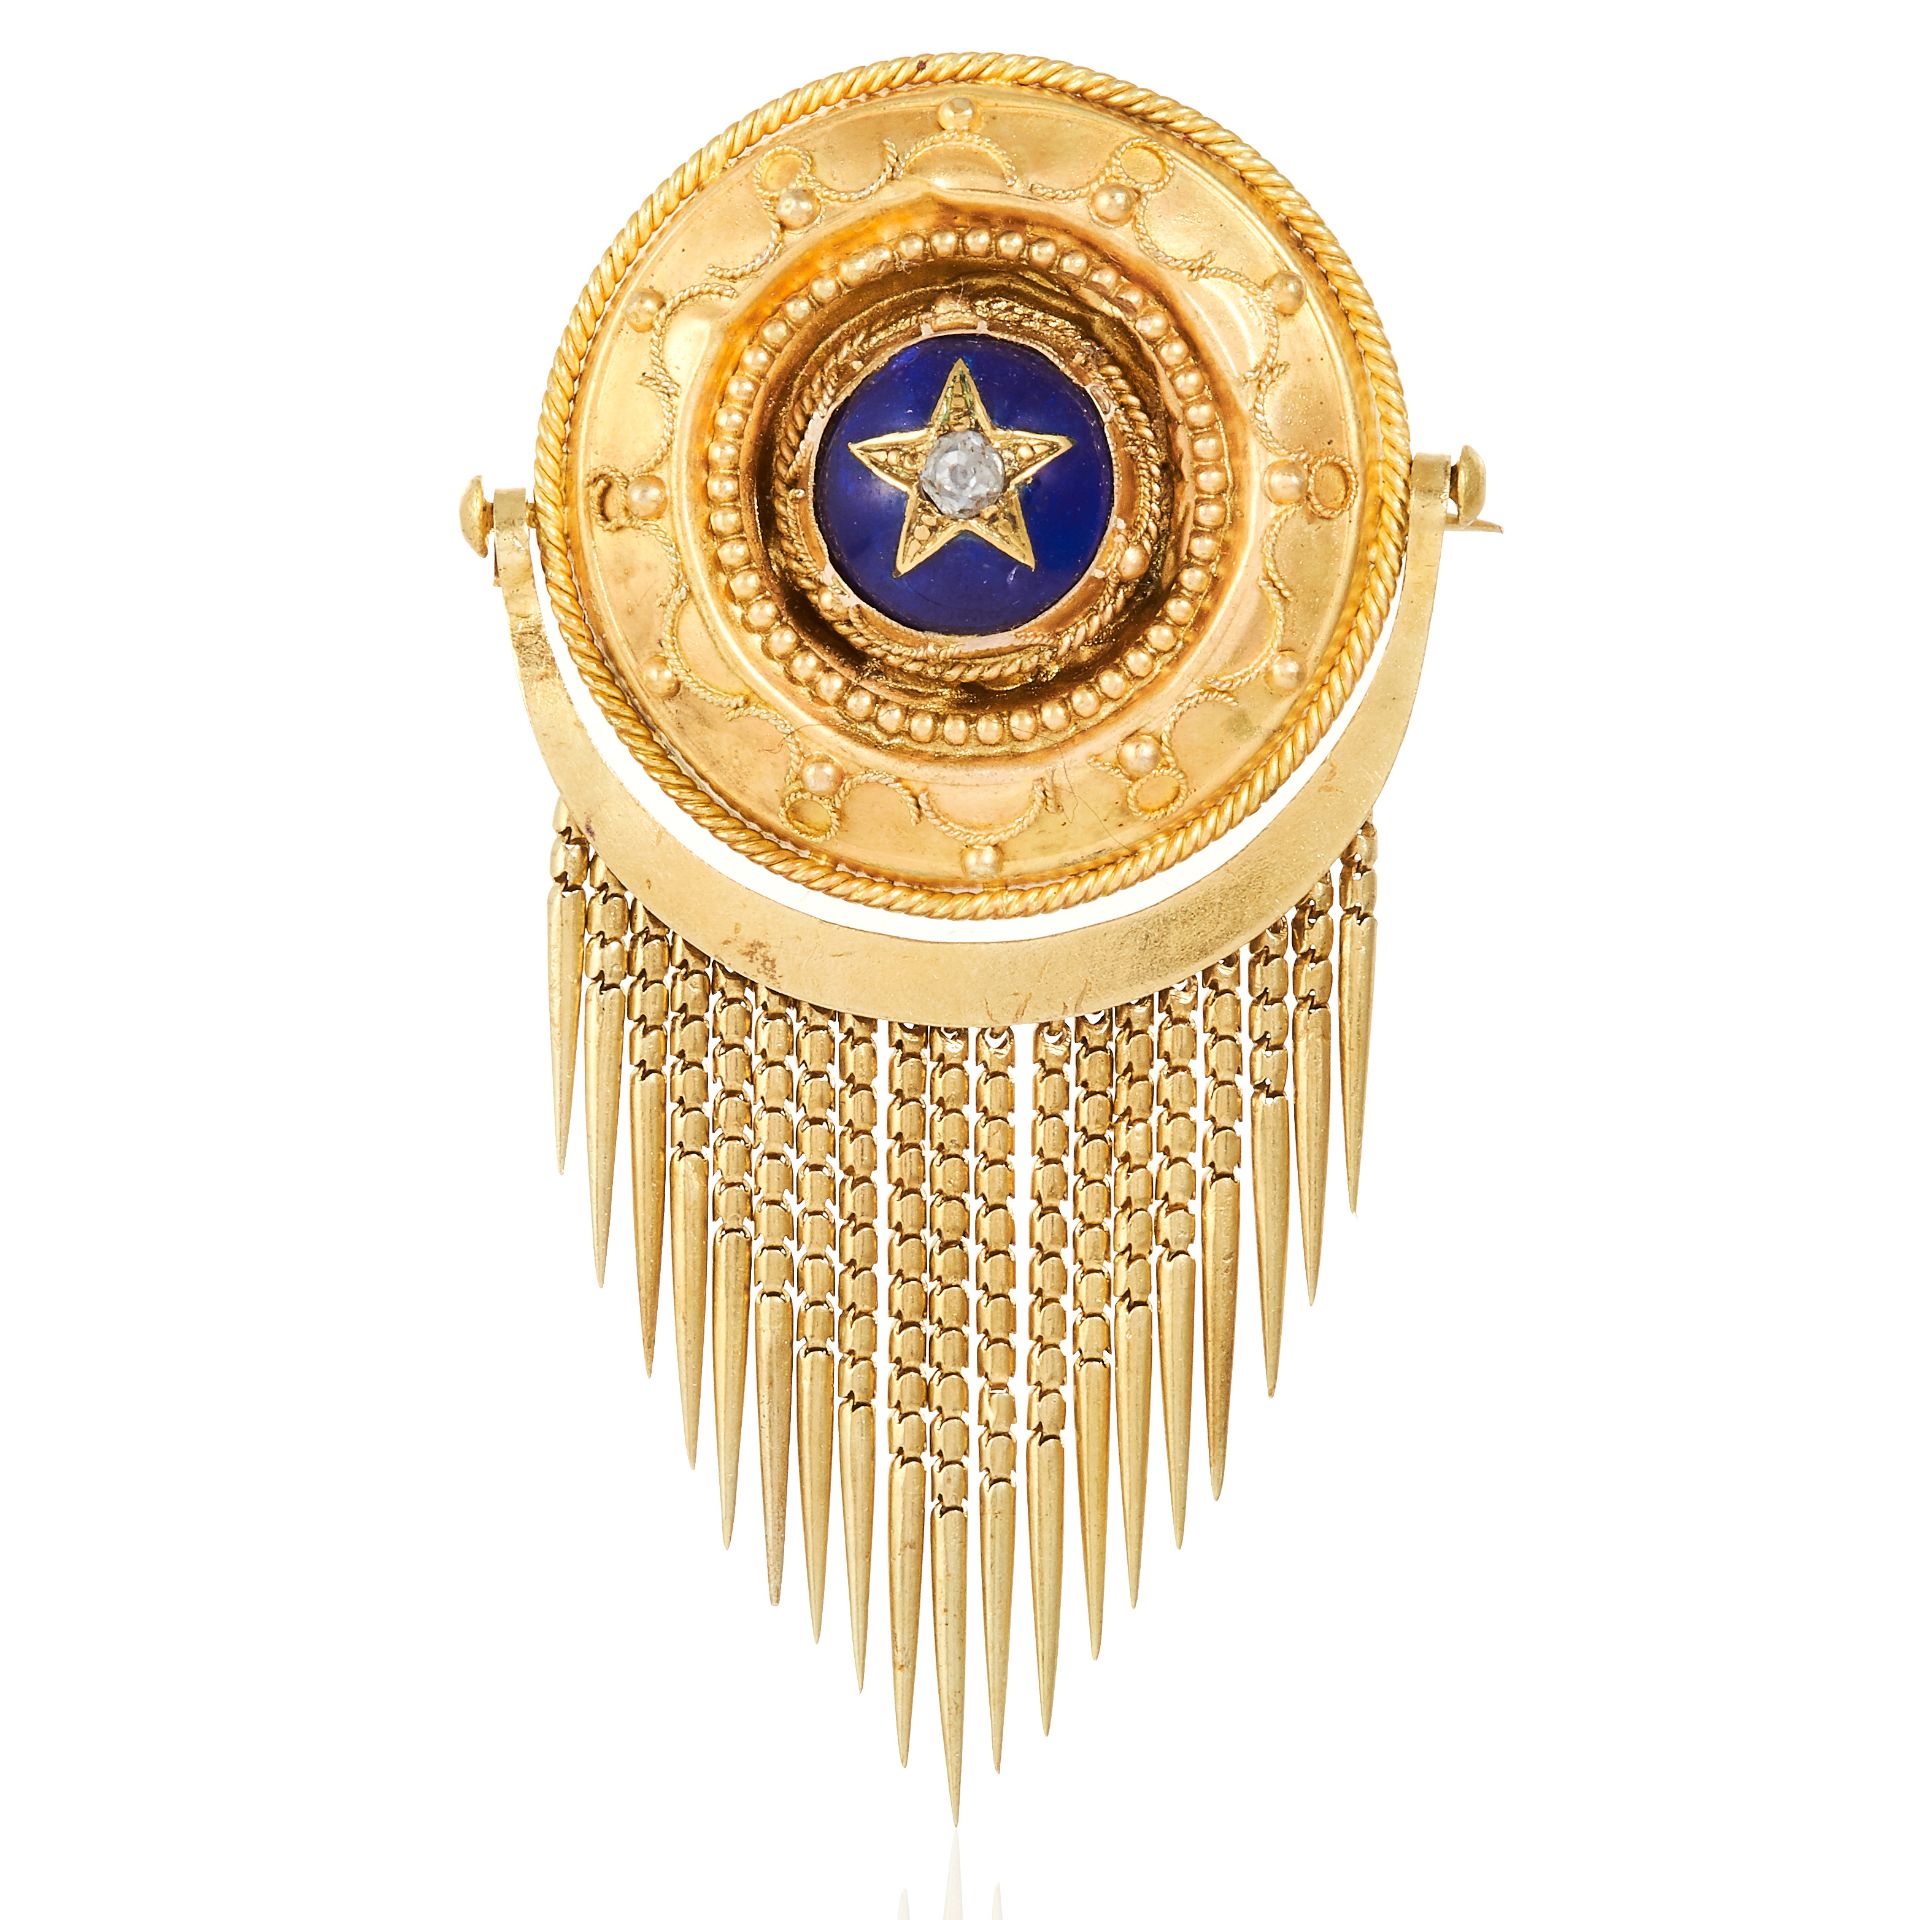 A DIAMOND AND ENAMEL MOURNING BROOCH in high carat yellow gold, the large circular body set with